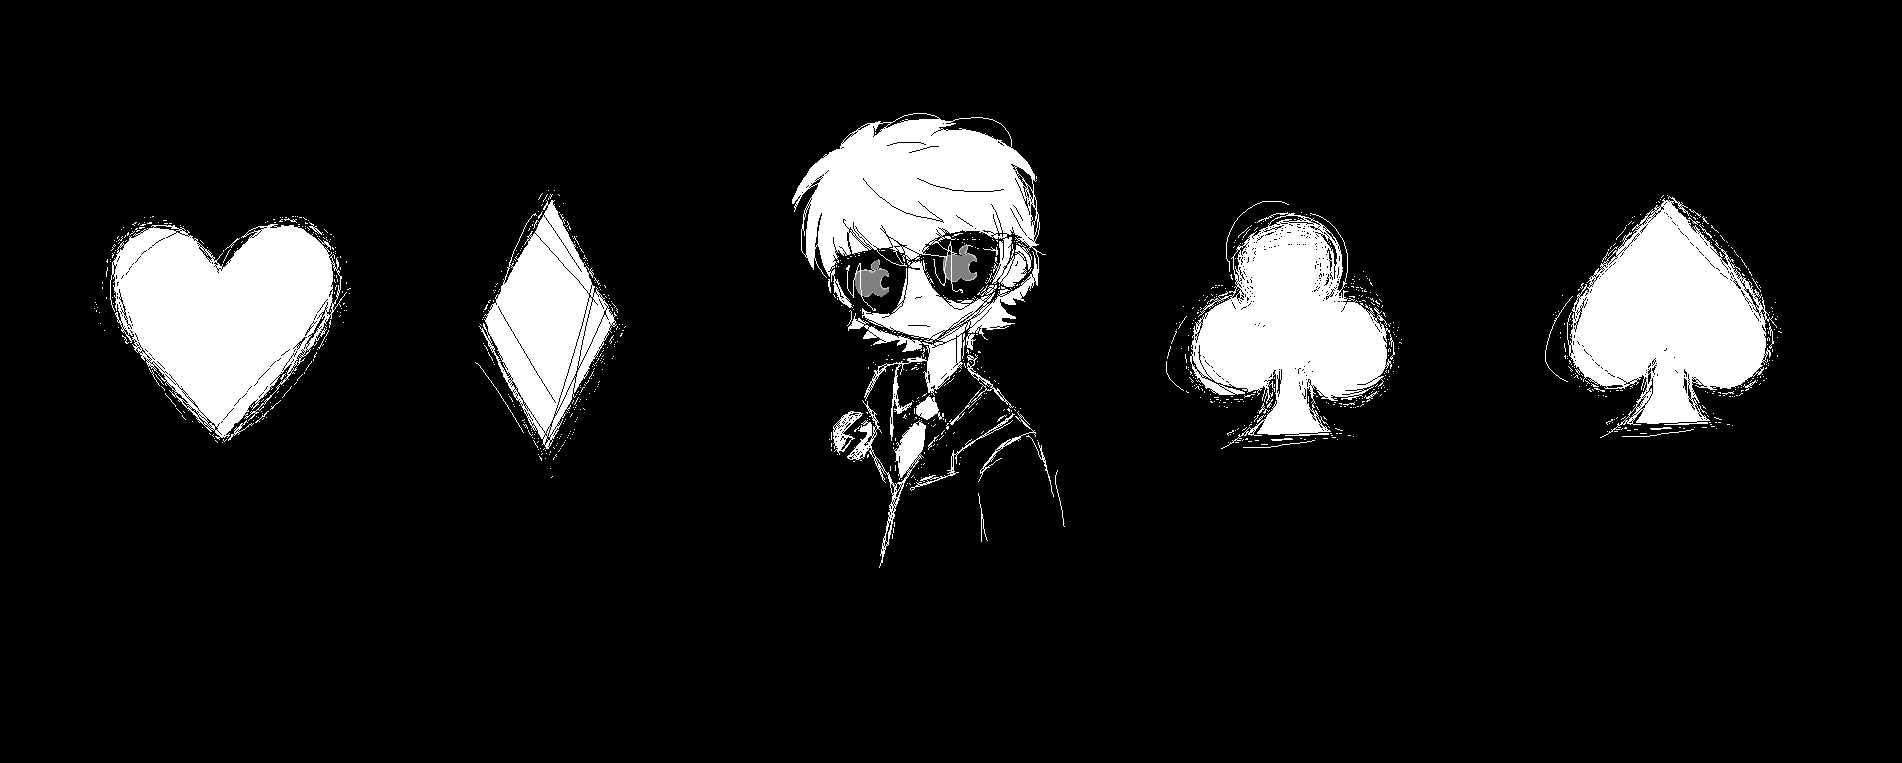 dave strider from homestuck in his four aces suit